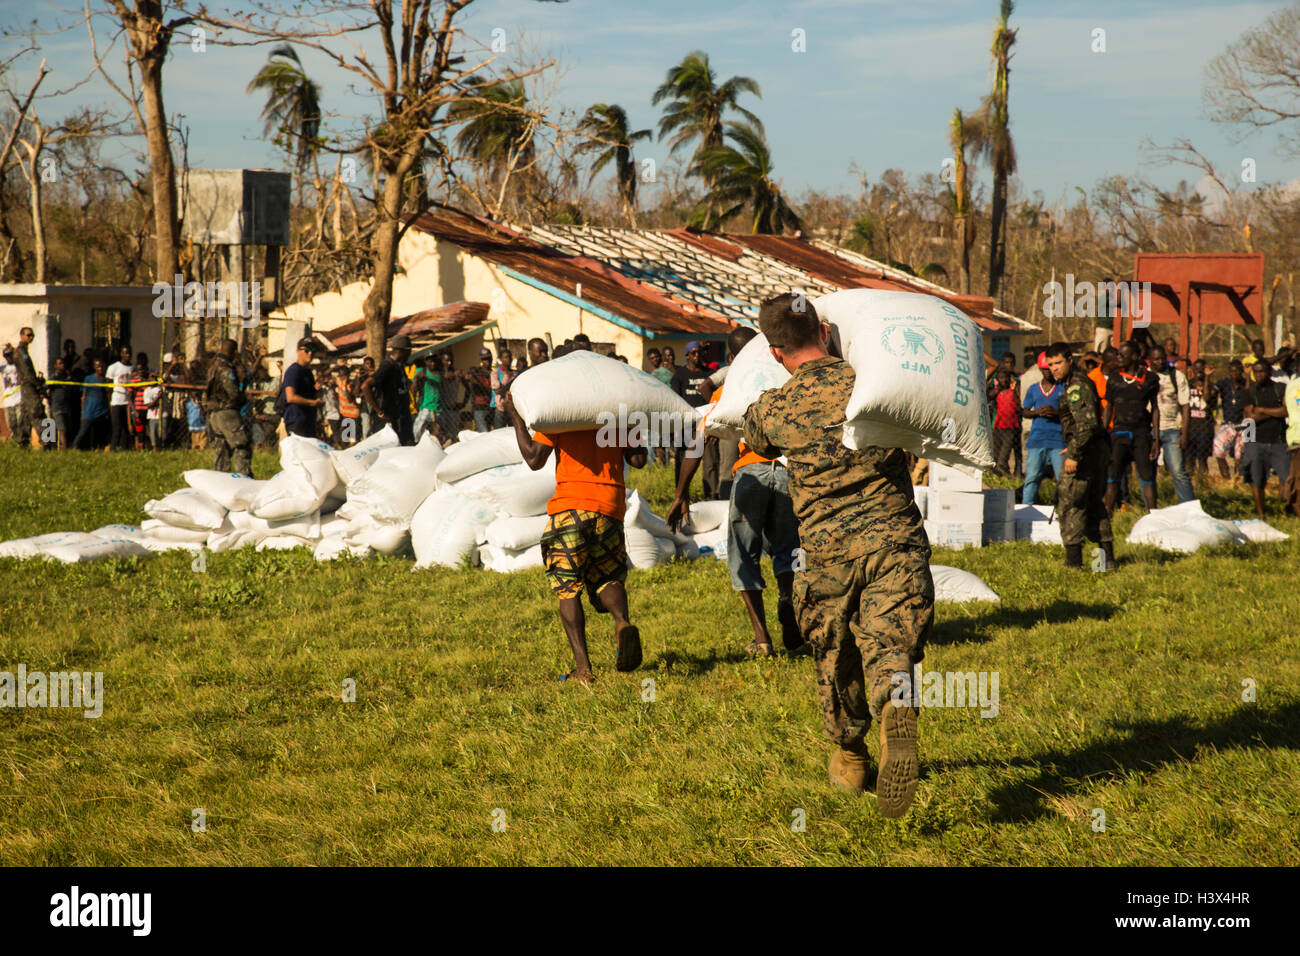 Dame Marie, Haiti. 12th October, 2016. U.S Marines assisted by Haitian unload food supplies to aid those affected by Hurricane Matthew October 12, 2016 in Dame Marie, Haiti. Hurricane Matthew struck Haiti with winds over 140-mph killing 500 people and causing widespread damage. Credit:  Planetpix/Alamy Live News Stock Photo